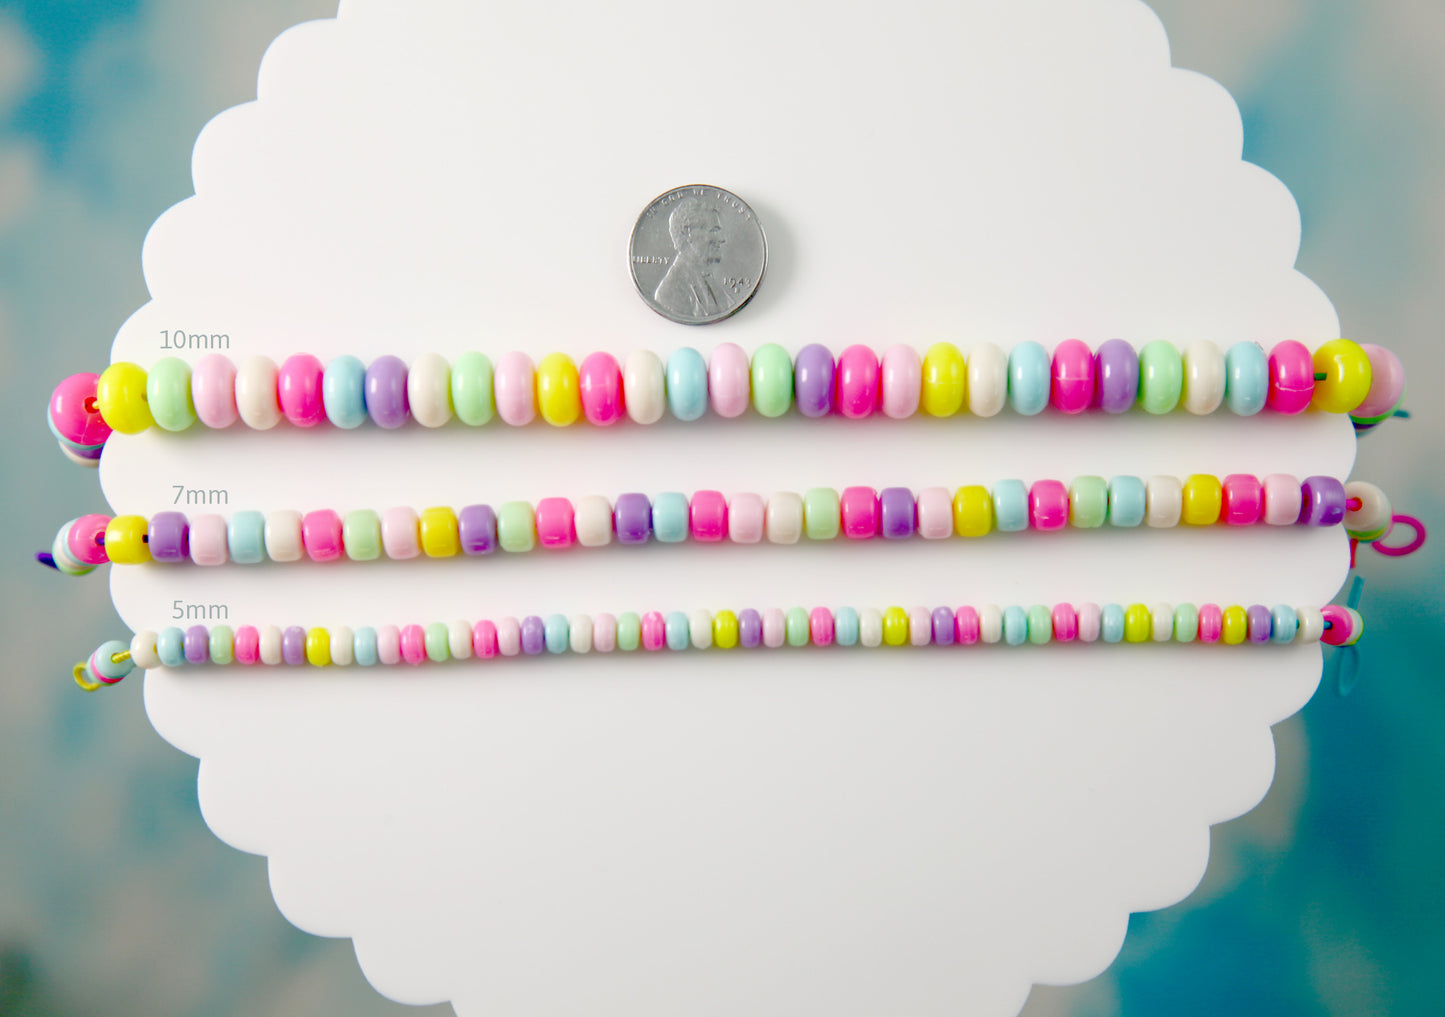 Candy Necklace Beads - 10mm Chunky Candy Color Rondelle Pastel Disc Shaped Faux Candies Acrylic or Plastic Beads - 100 pc set